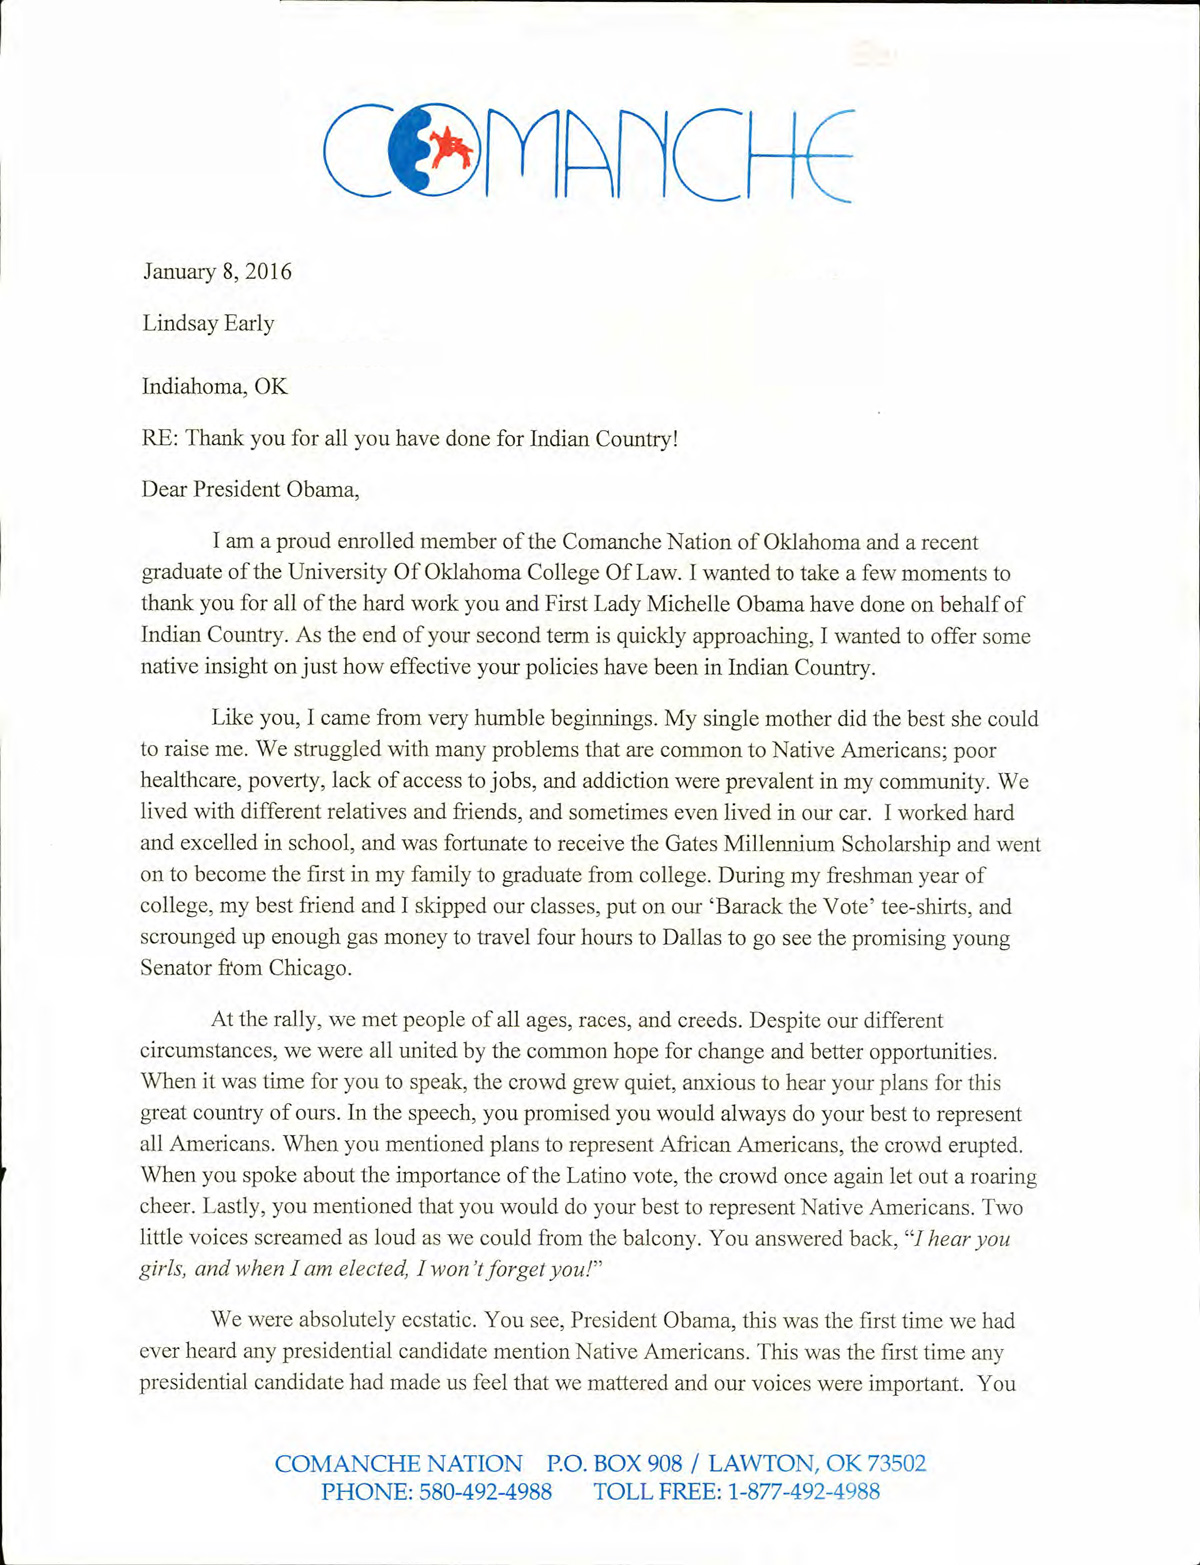 Lindsay Early's letter to President Obama